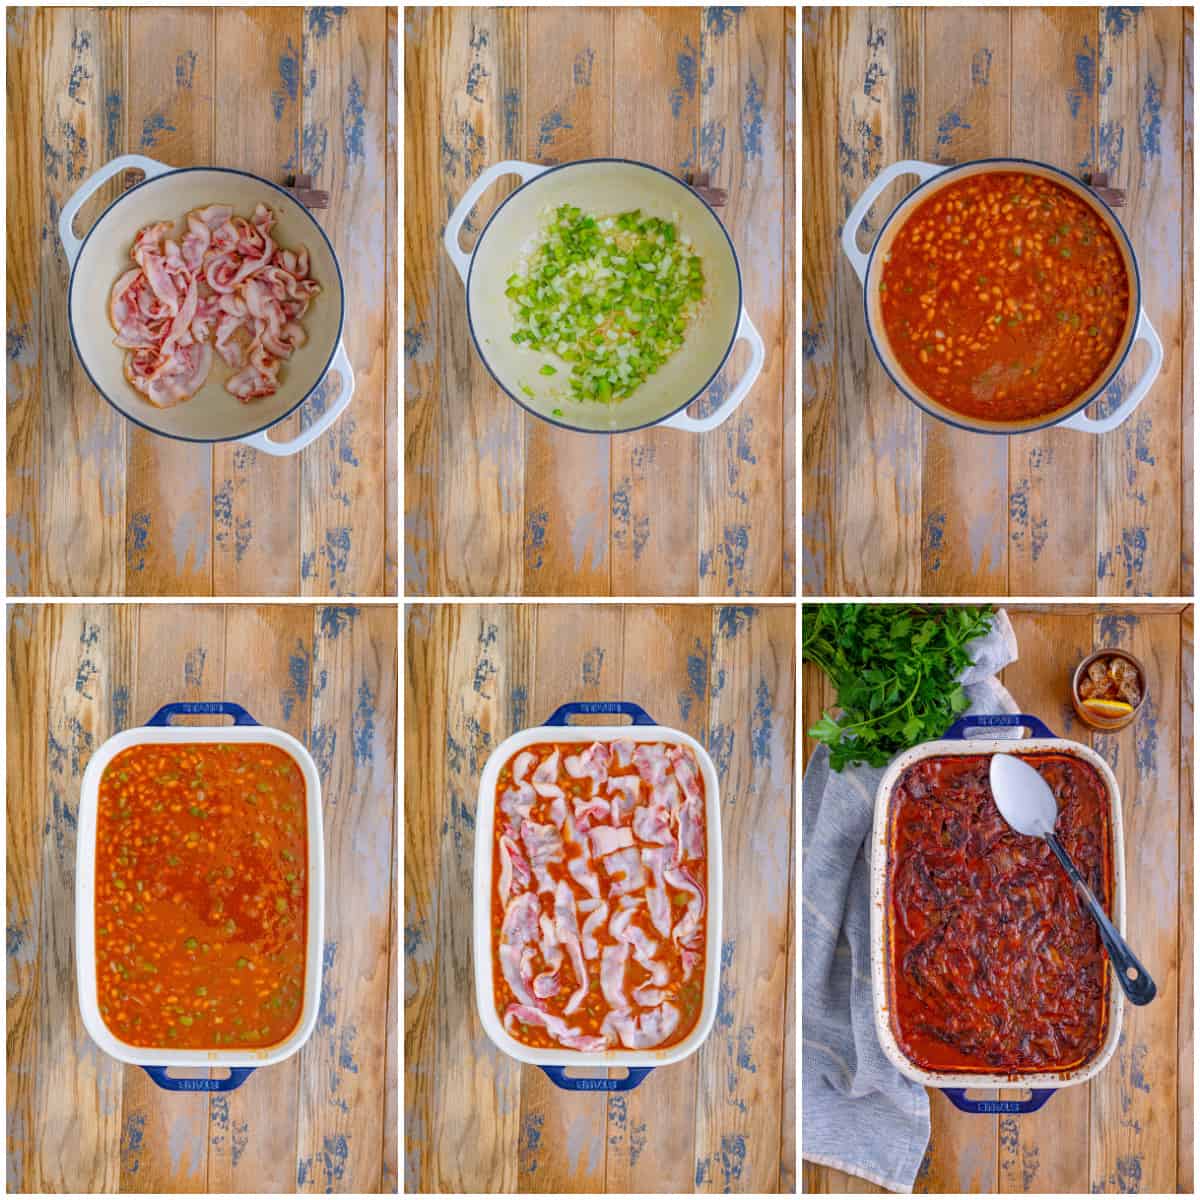 Step by step photos on how to make Homemade Baked Beans.